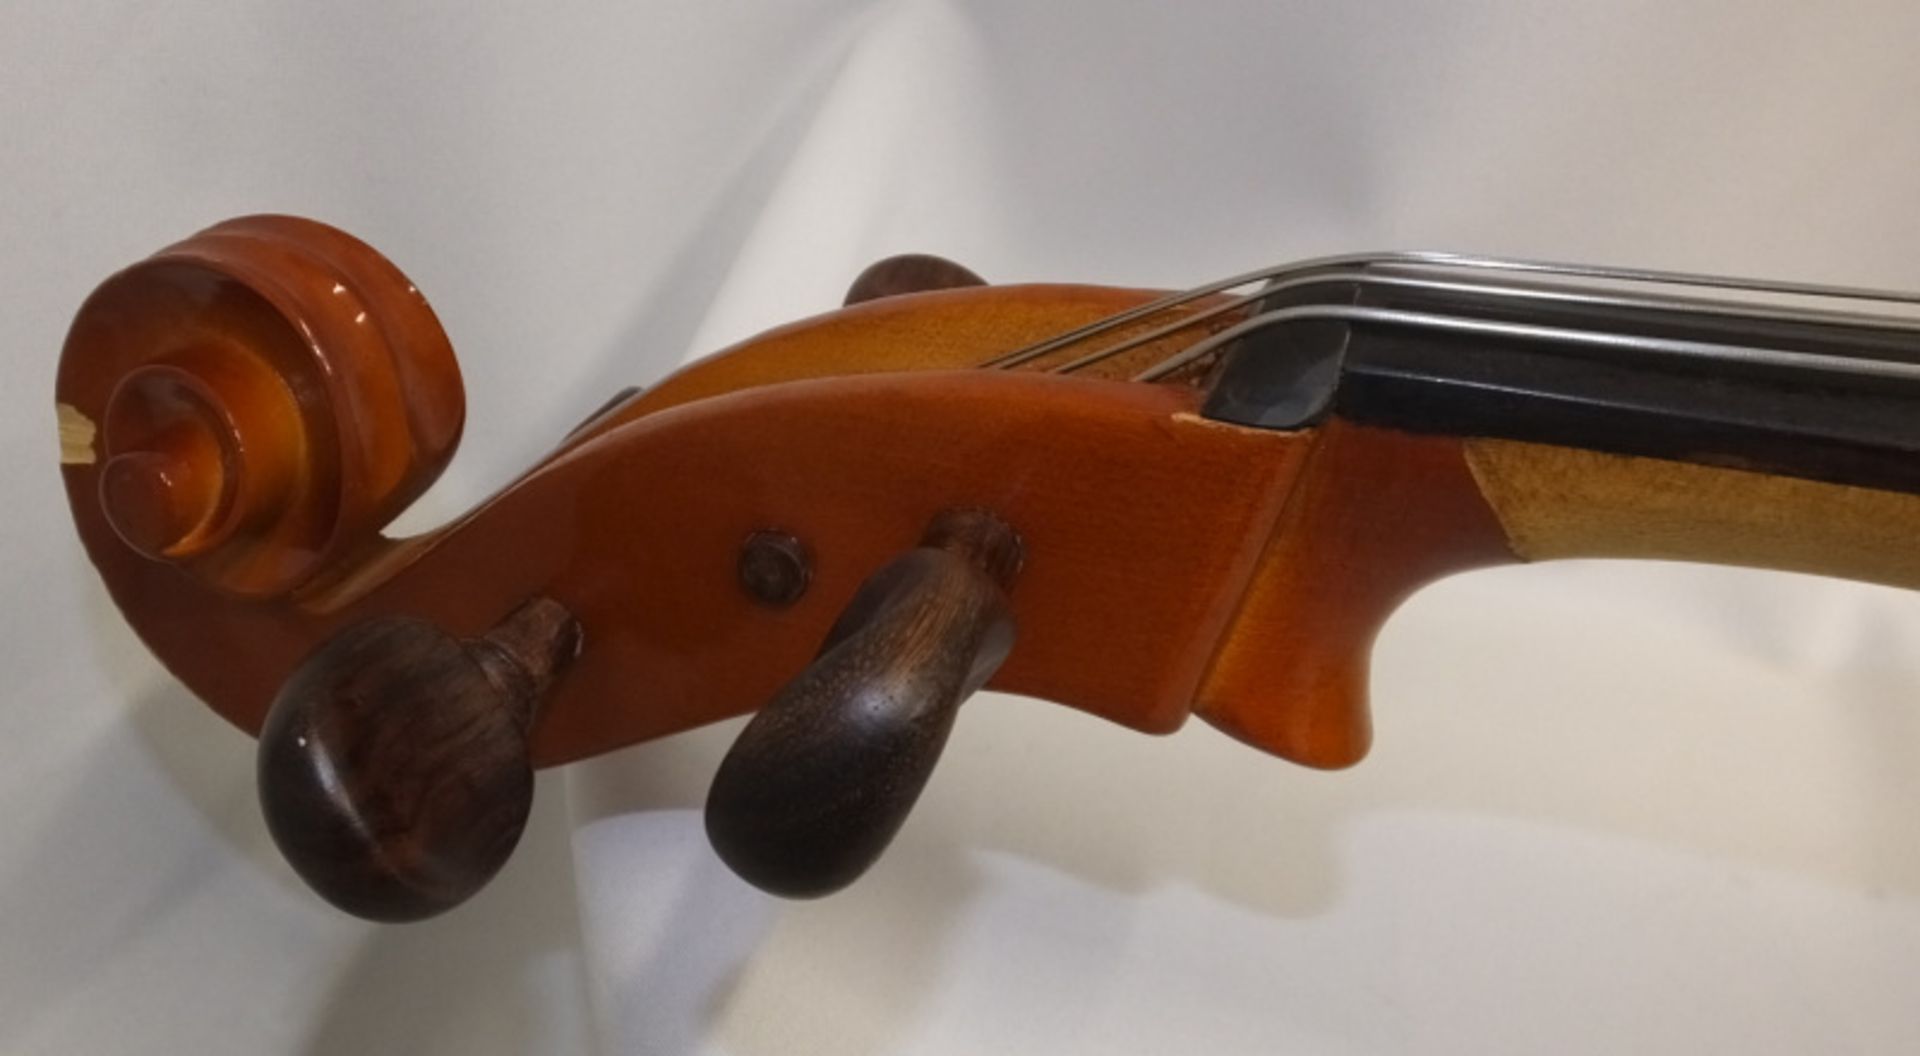 Cello in carry case (unbranded) - Please check photos carefully for damaged or missing components - Image 7 of 21